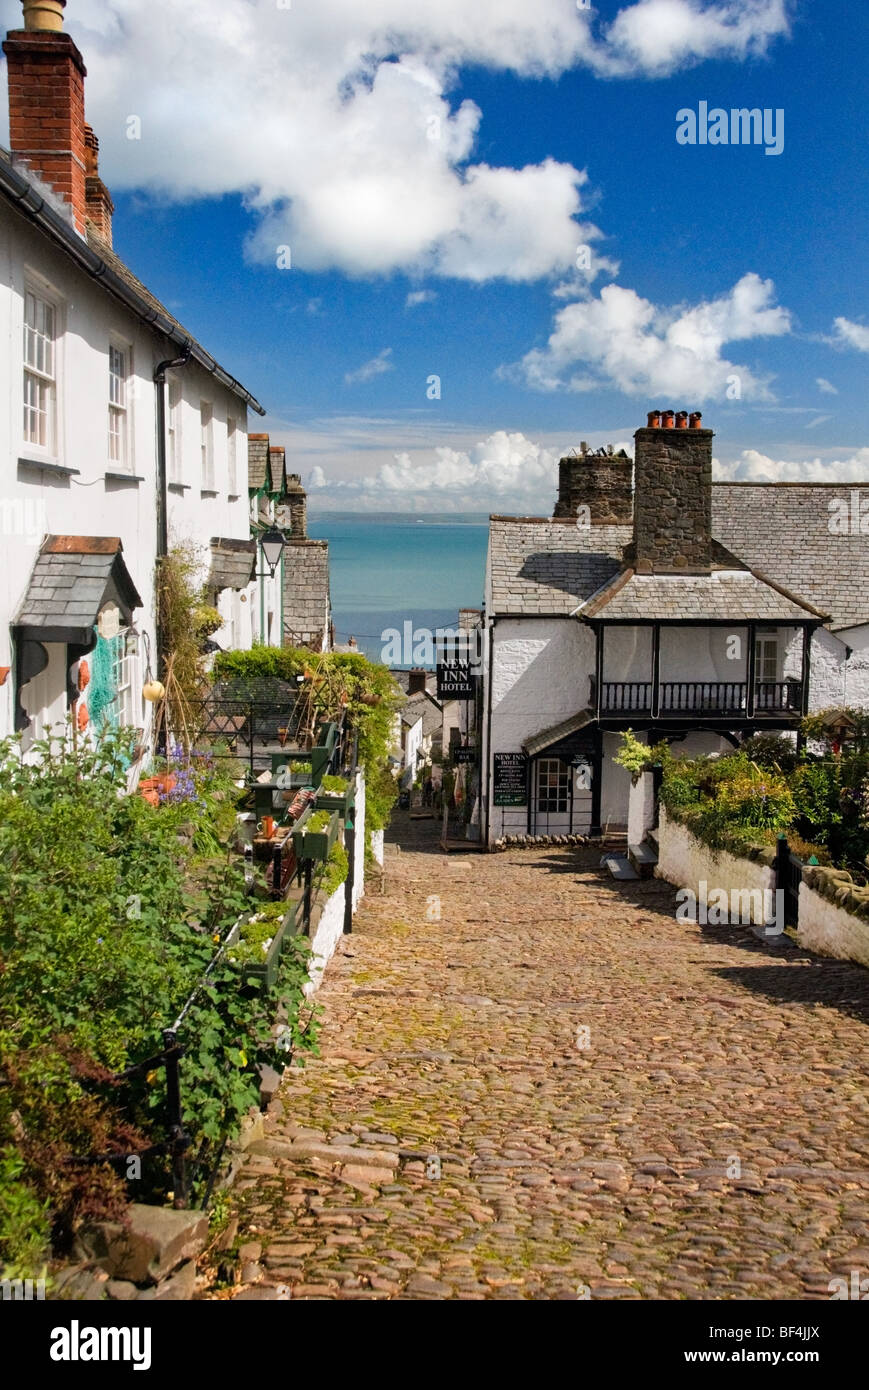 The steep cobbled main street through the picturesque village of Clovelly in Devon, England, UK Stock Photo